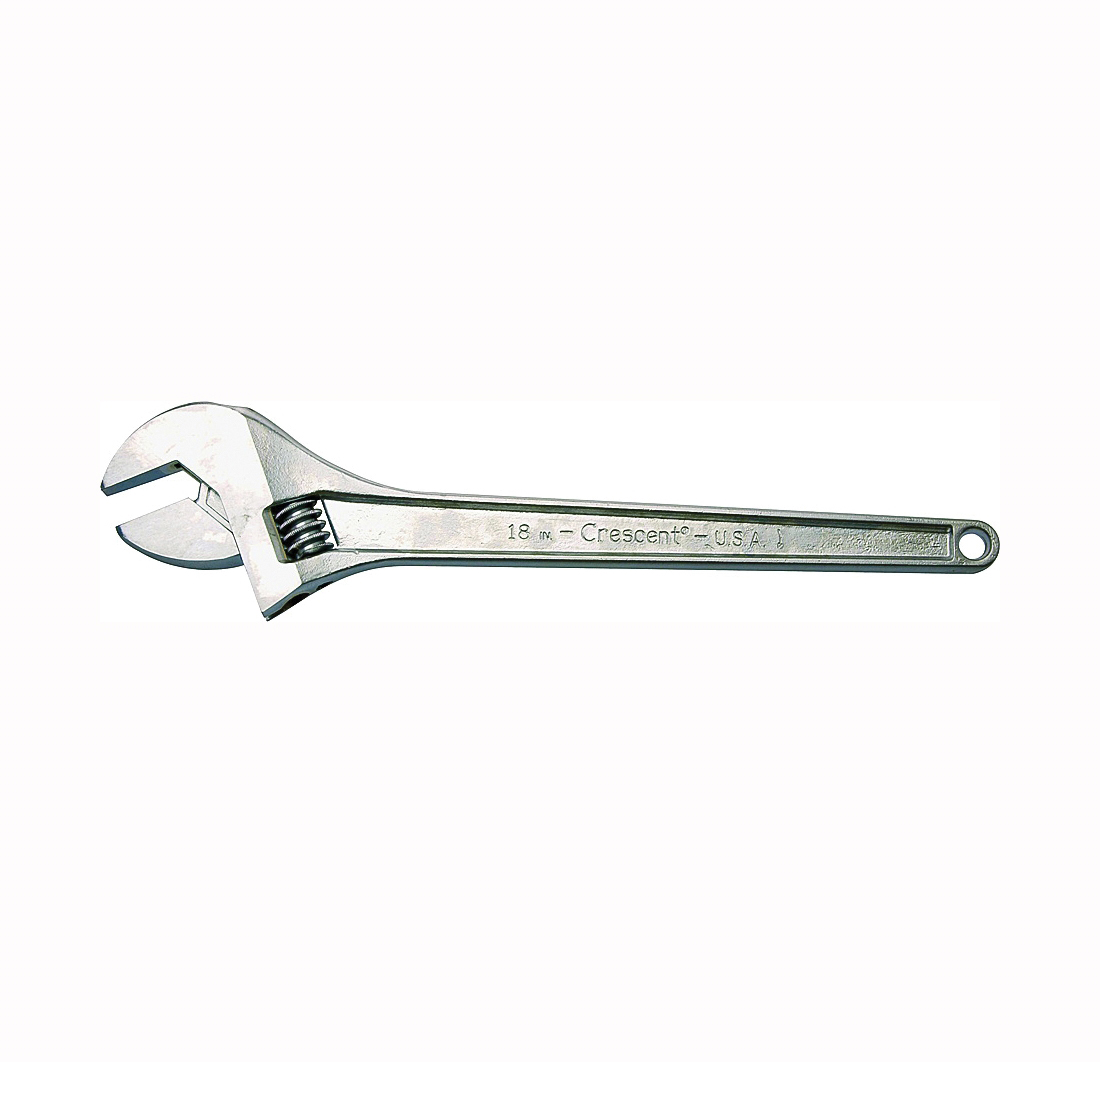 AC118 Adjustable Wrench, 18 in OAL, 2.063 in Jaw, Steel, Chrome, I-Beam Handle